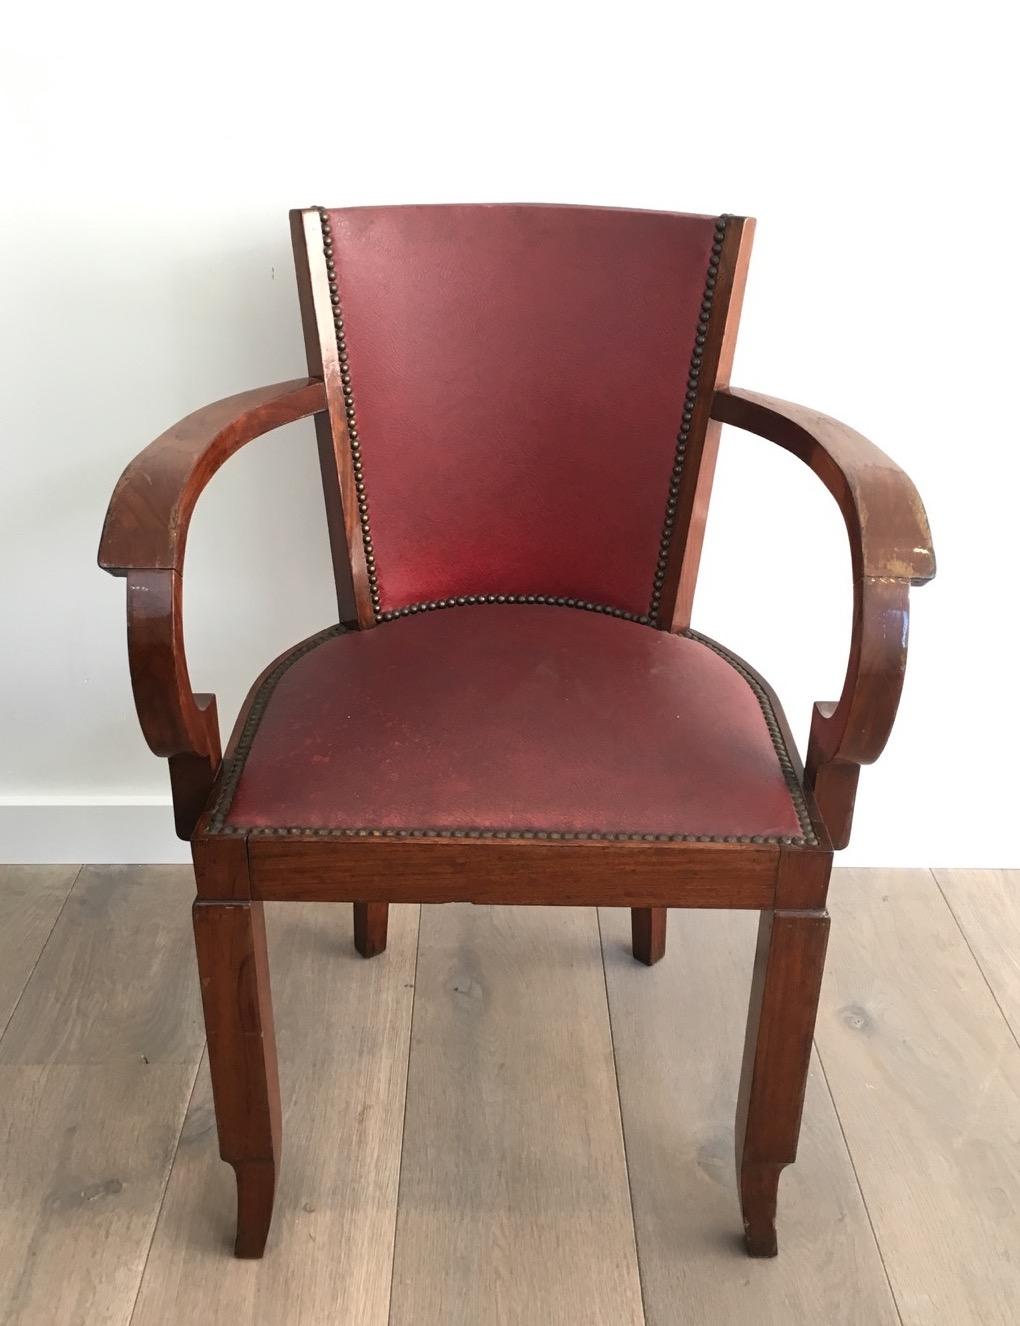 Rare Set of 8 Mahogany and Faux-Leather Art Deco Armchairs, French, circa 1930 For Sale 2